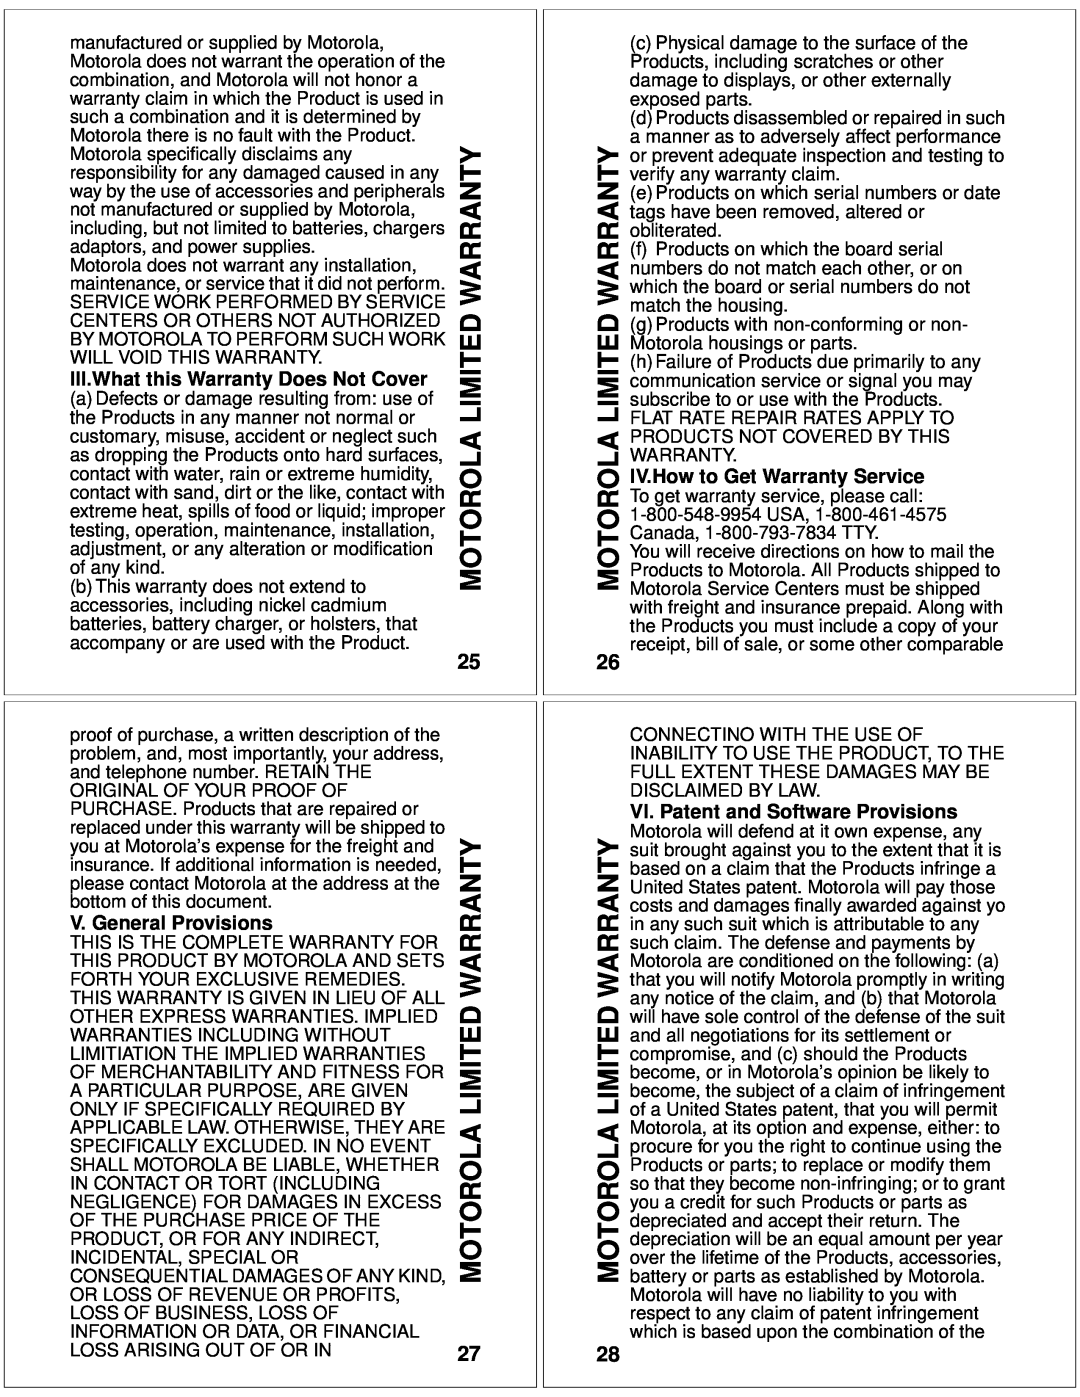 Motorola T10 manual Motorola Limited Warranty, III.What this Warranty Does Not Cover, V. General Provisions 